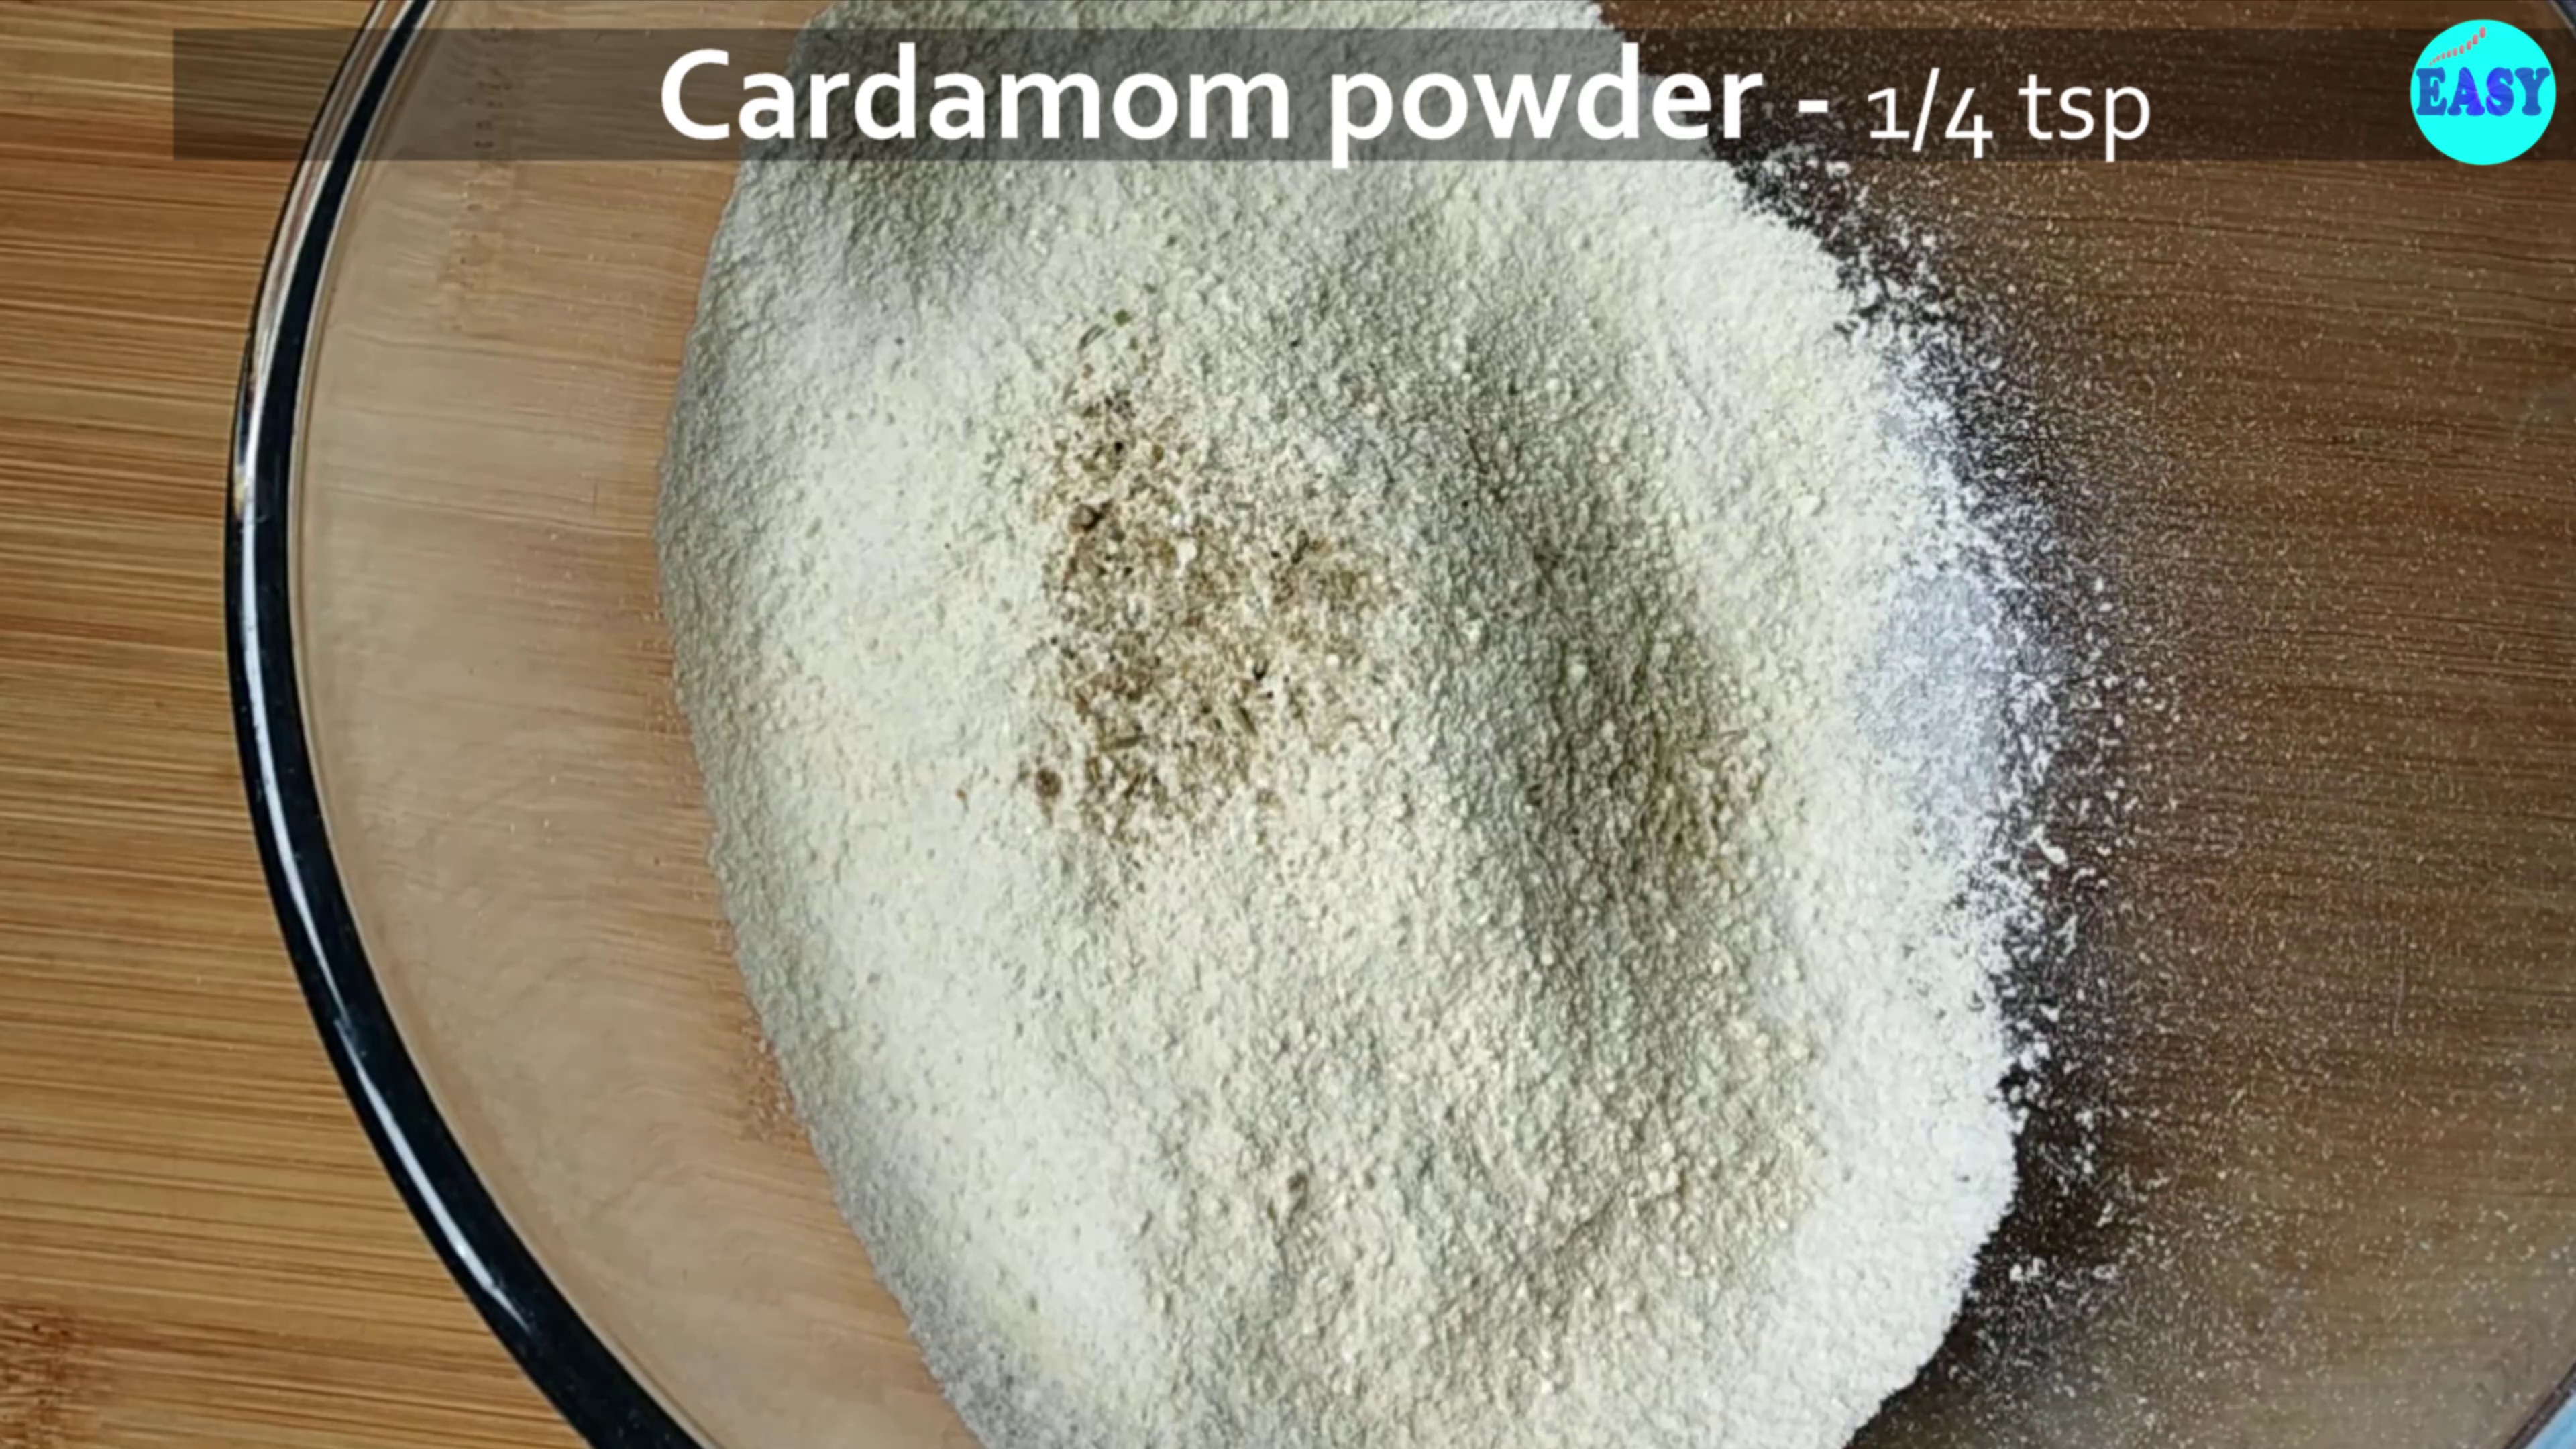 Step 2 - Add some cardamom powder or nutmeg powder to flavour the cookies.